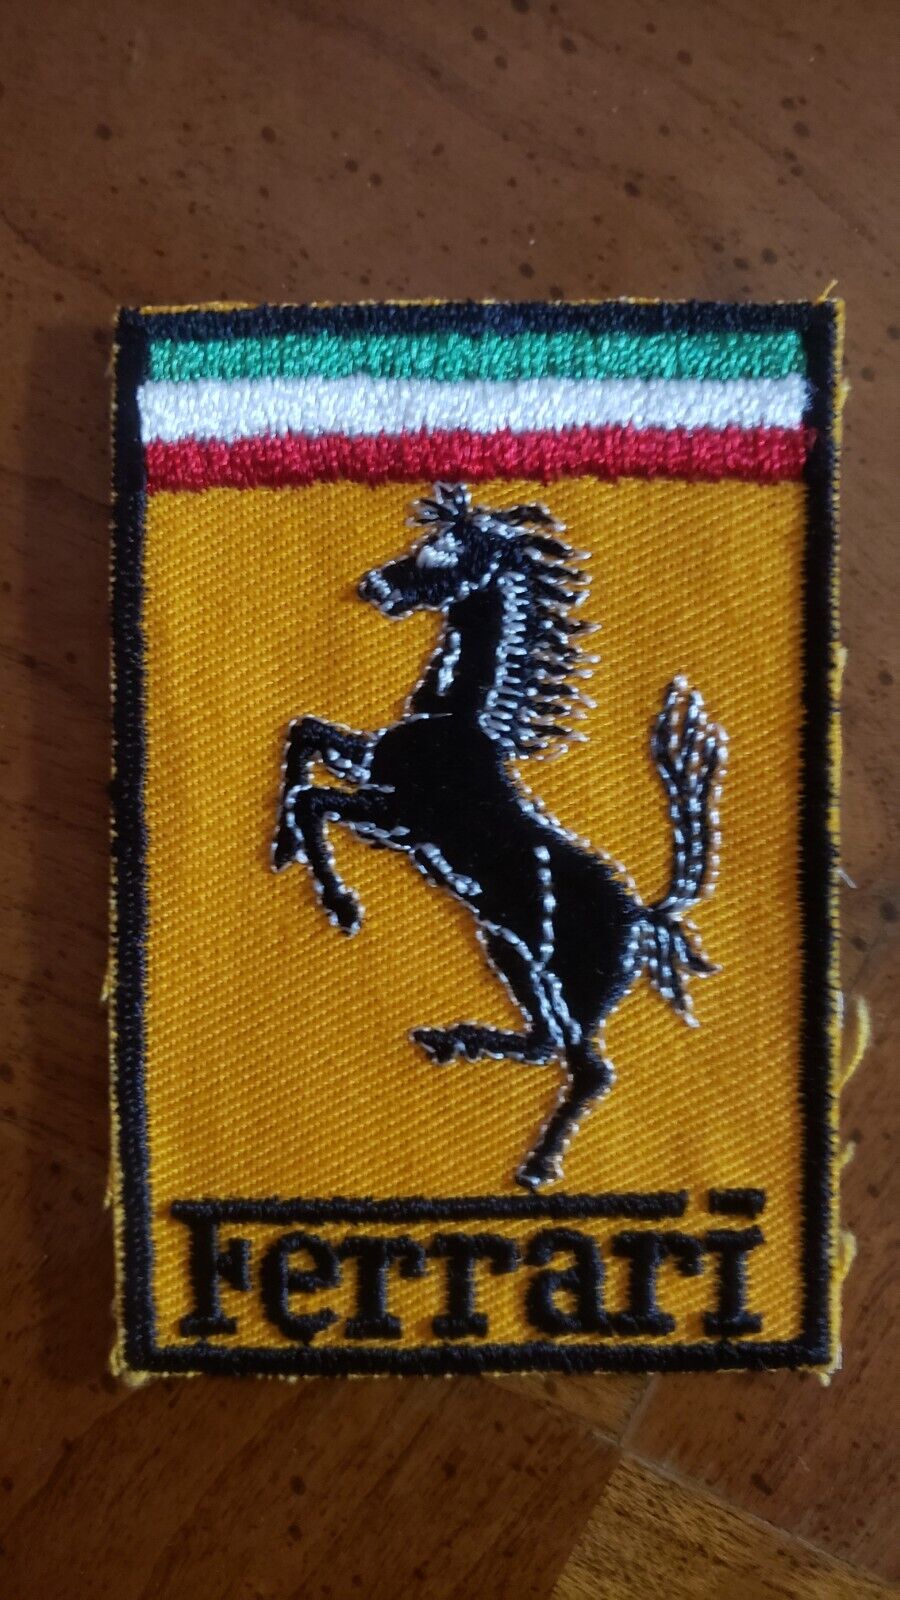 1960s Vintage Ferrari Cloth Patch Sew On, Rectangular, 4 available